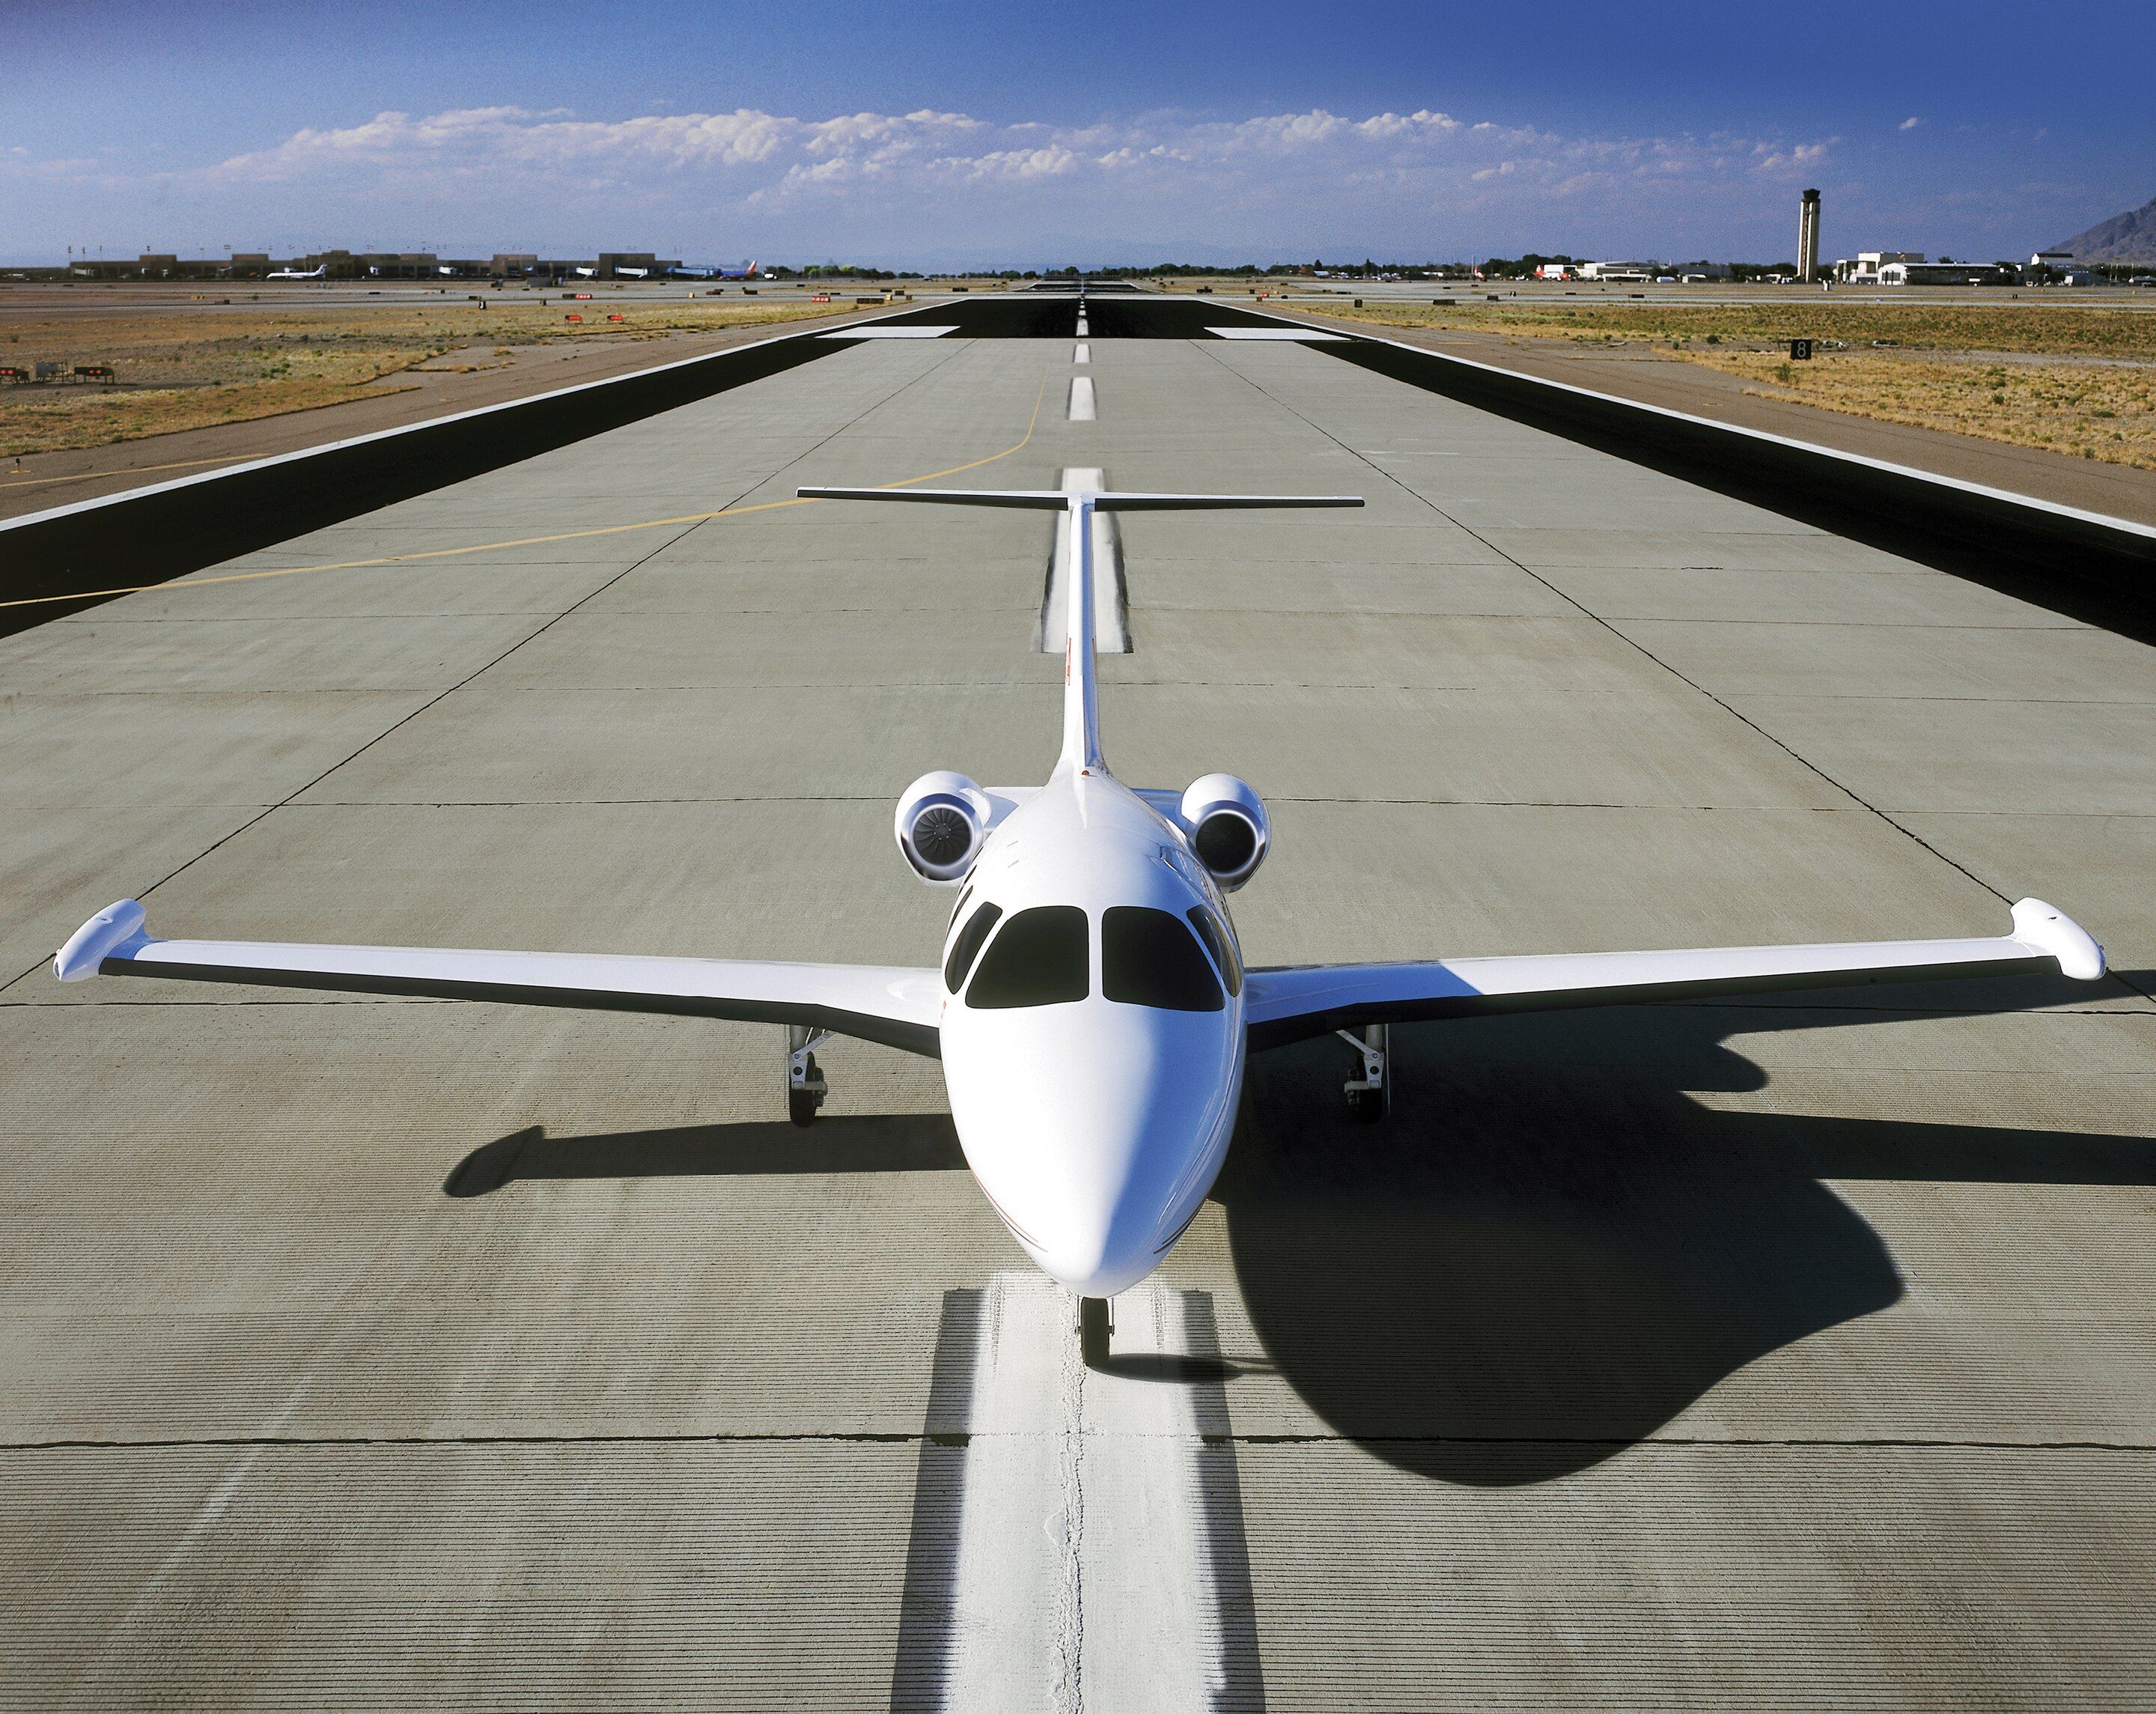 Eclipse 500 on the runway